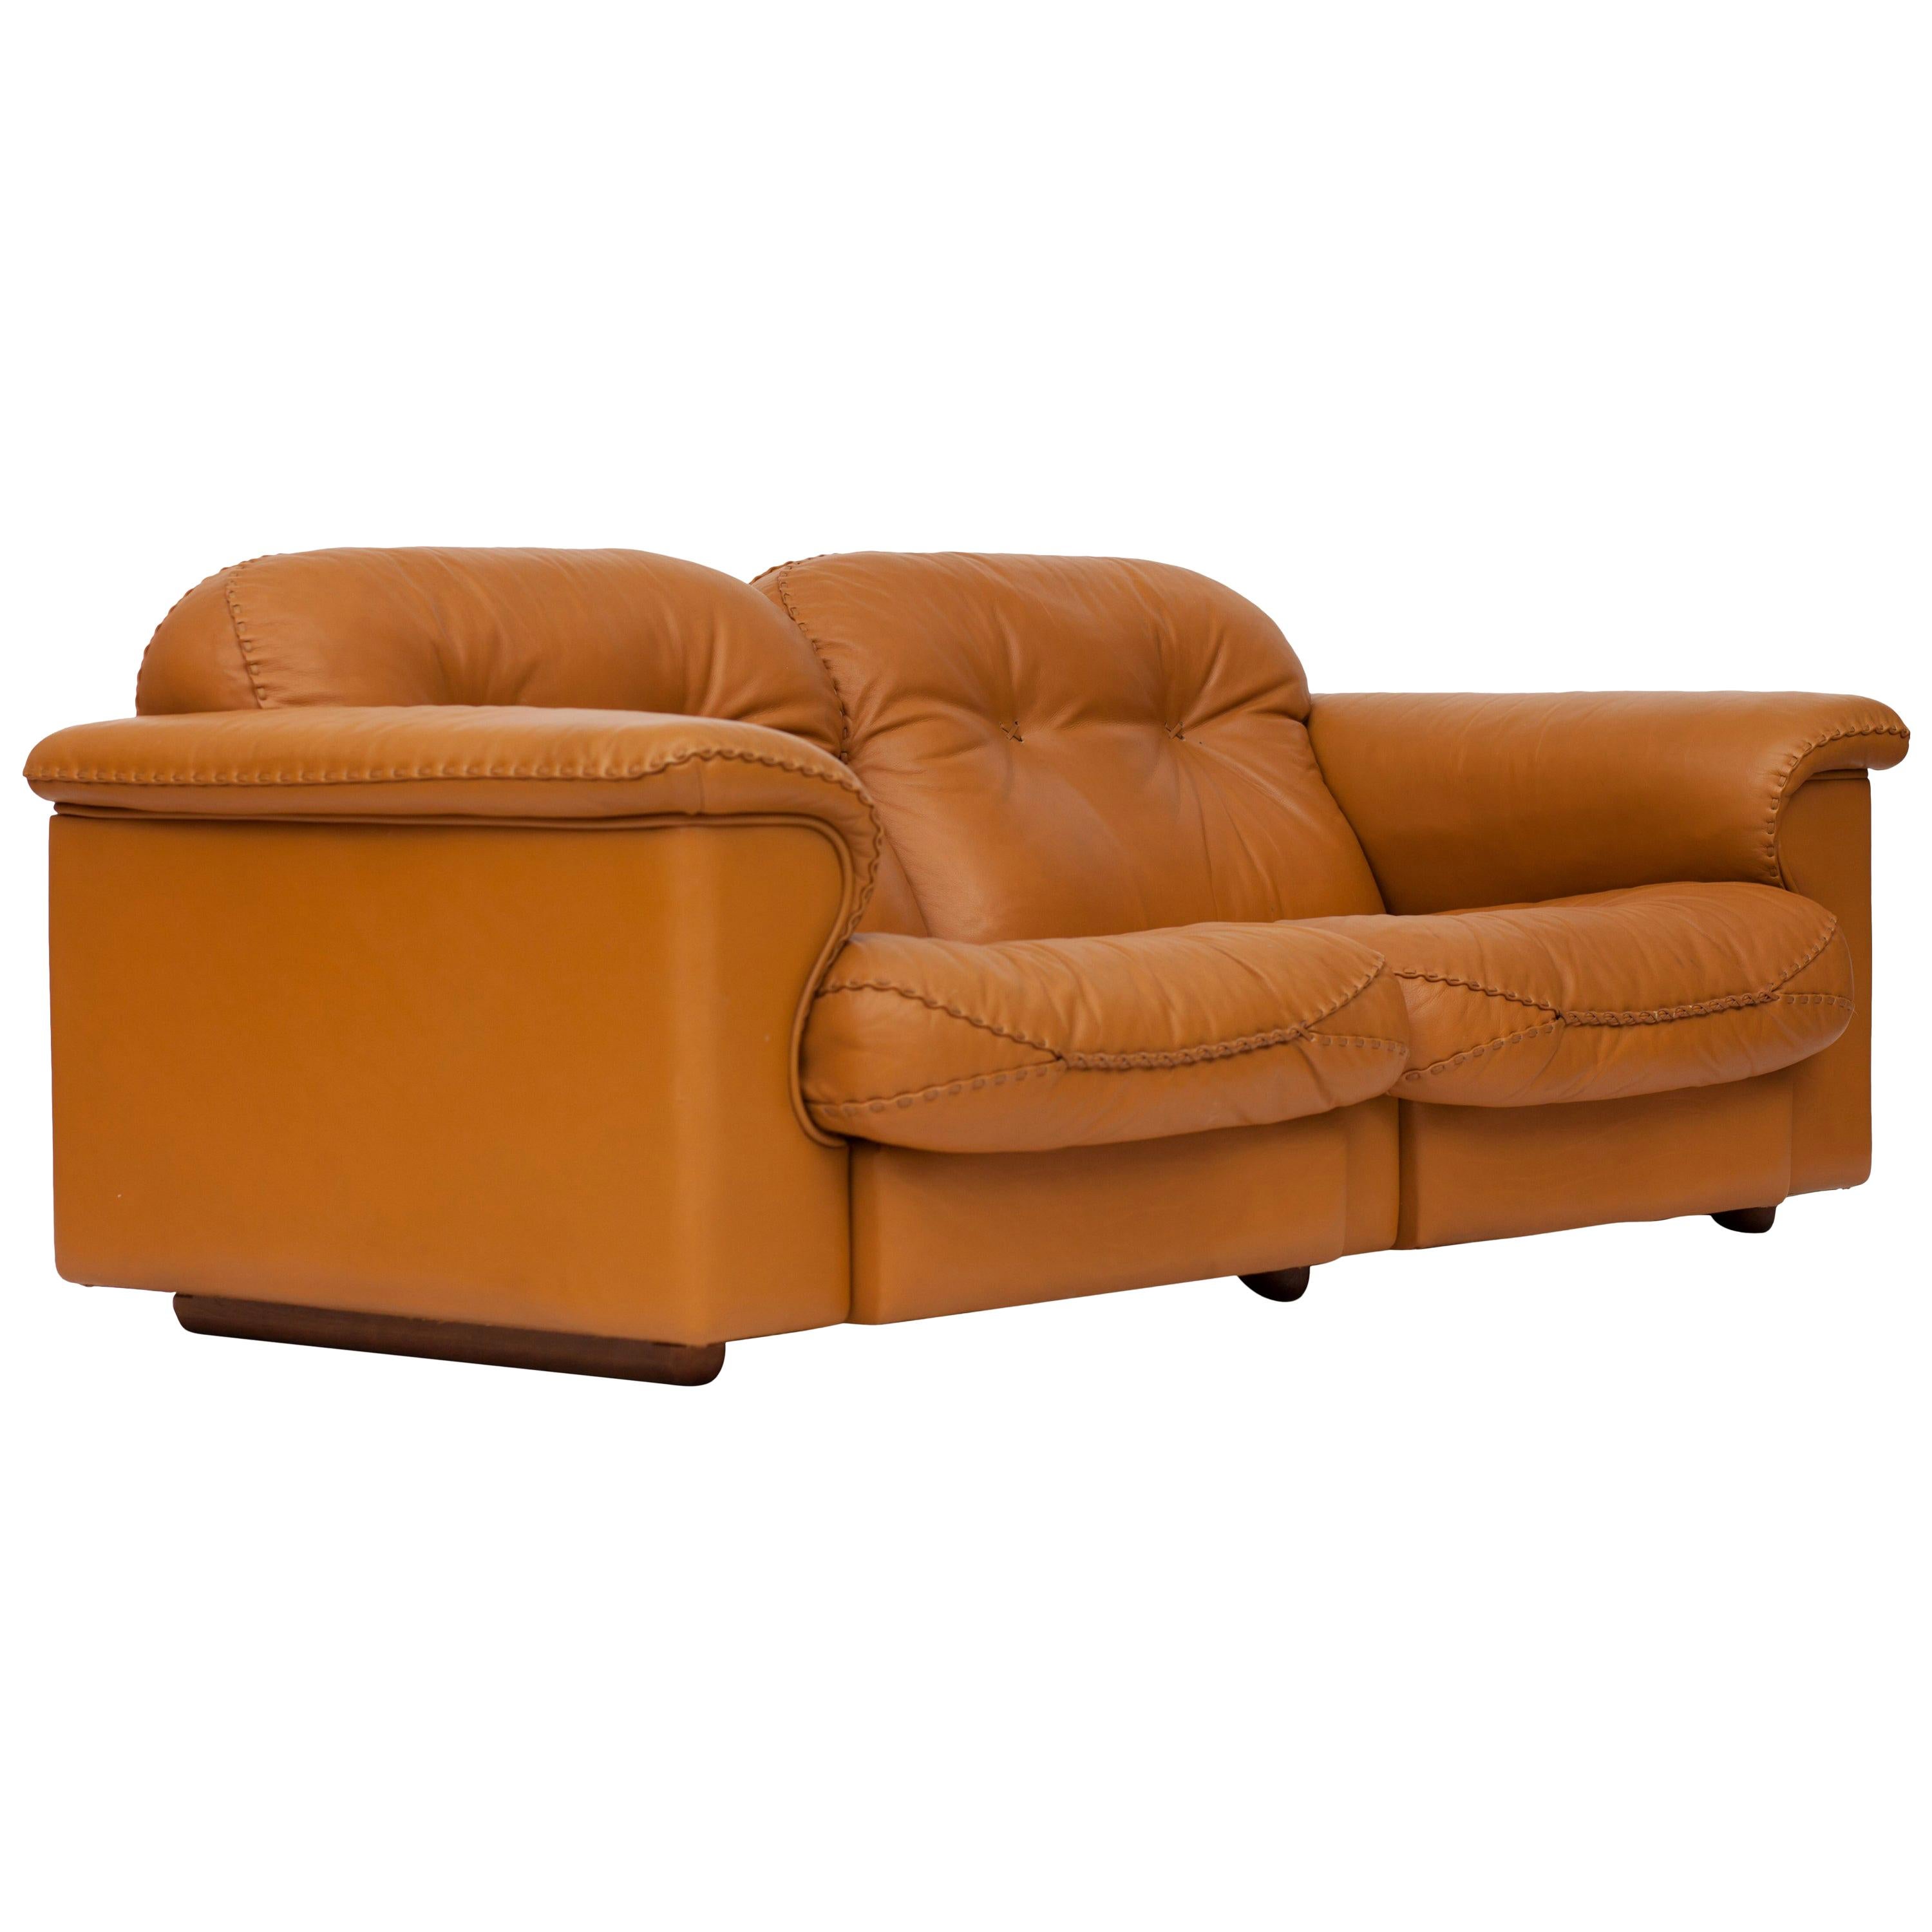 Mid-Century Modern adjustable and comfortable two-seat sofa by De Sede.
The sofa is provide with a high quality brown leather and interesting think stitched seams.
The sofa features in a James Bond movie.


  